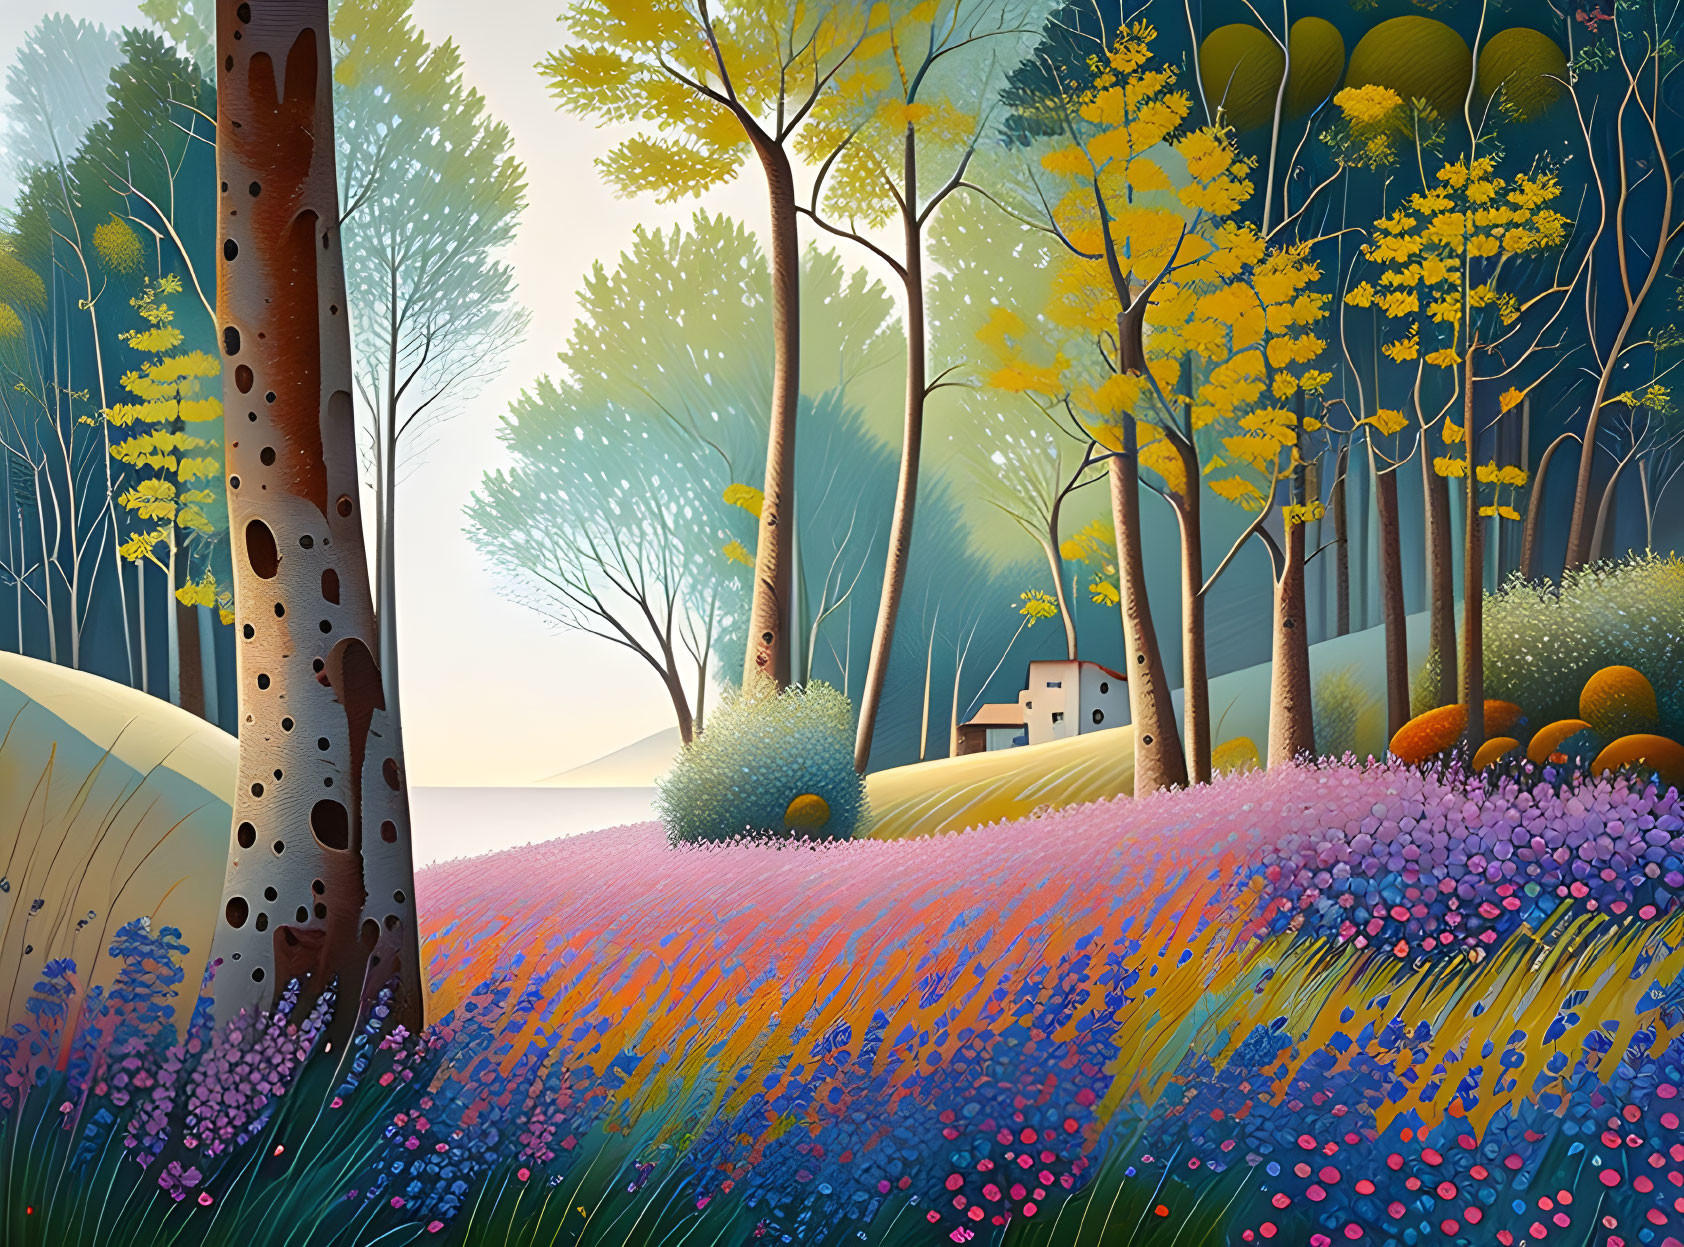 Colorful forest landscape with vibrant trees, purple flowers, and distant house